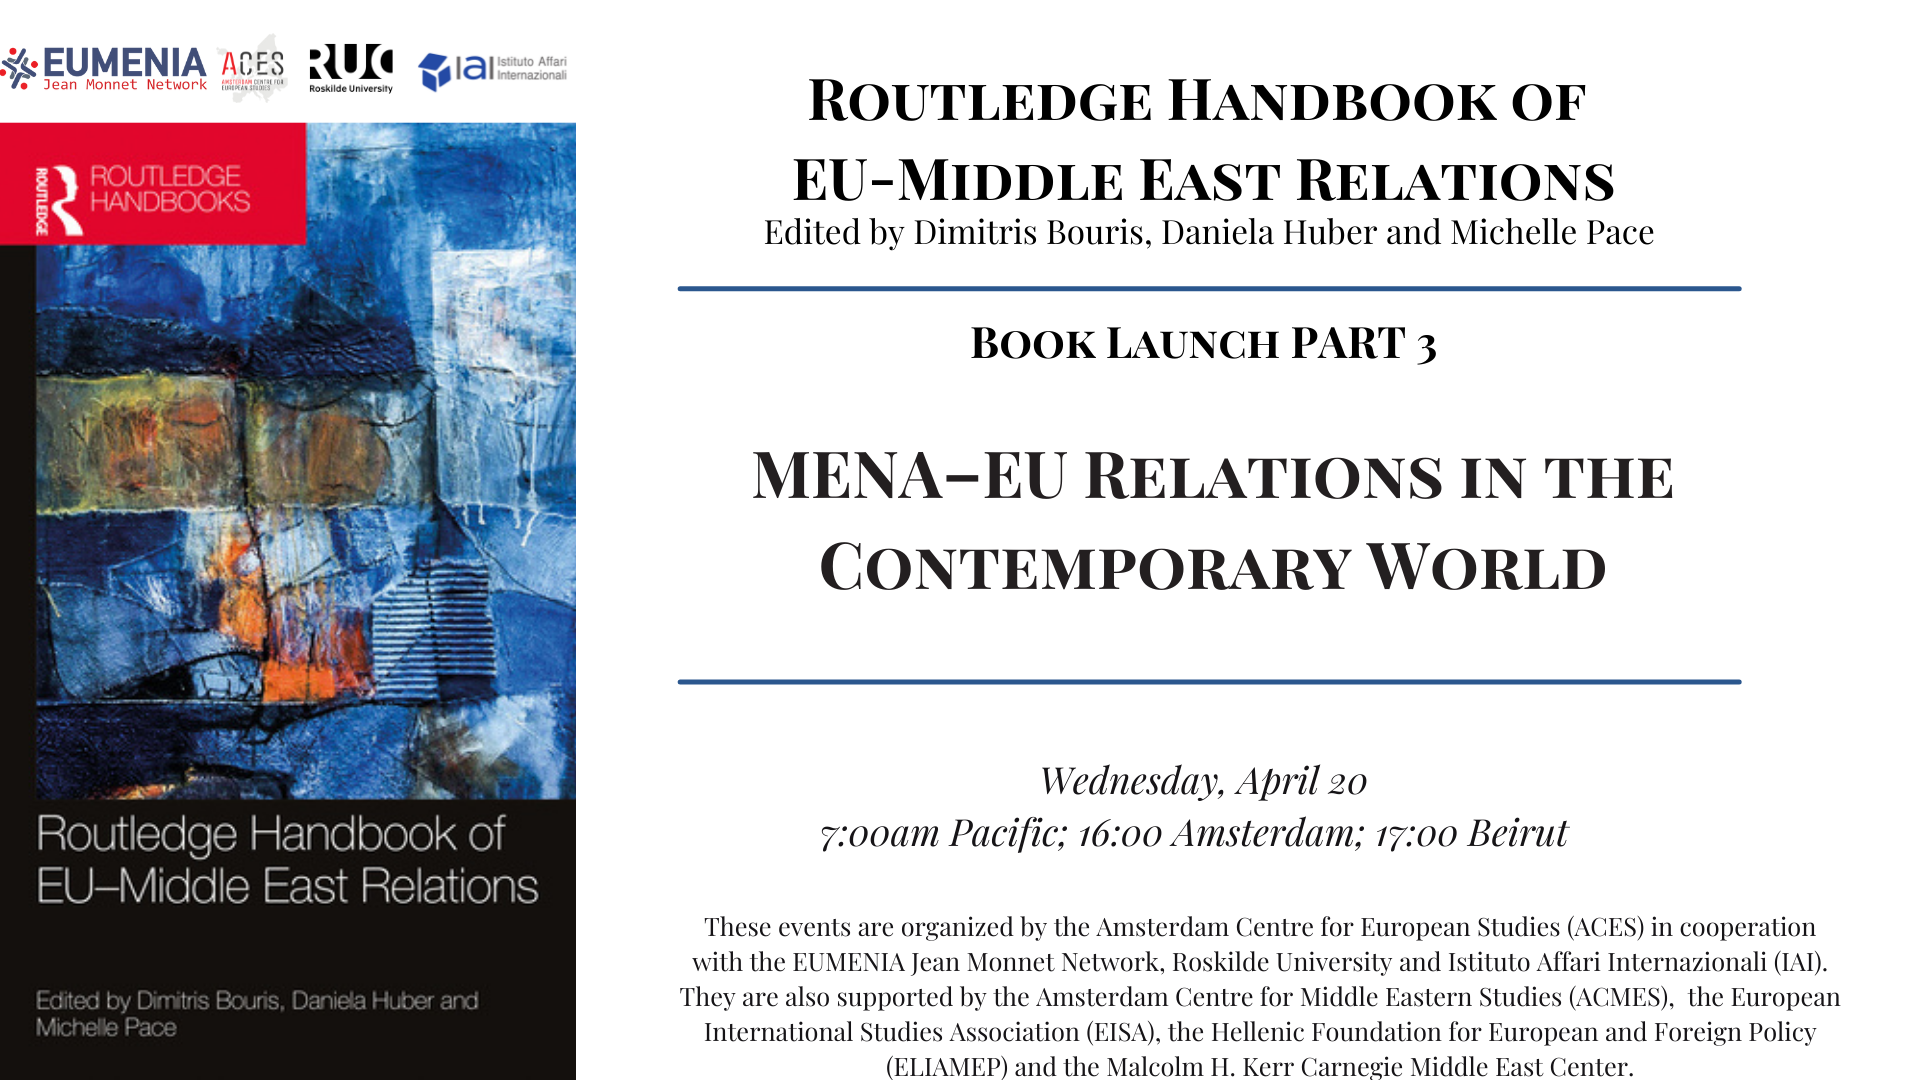 JOIN US FOR THE THIRD EVENT OF THE LAUNCH SERIES OF THE ROUTLEDGE HANDBOOK OF EU-MIDDLE EAST RELATIONS ON WEDNESDAY, APRIL 20